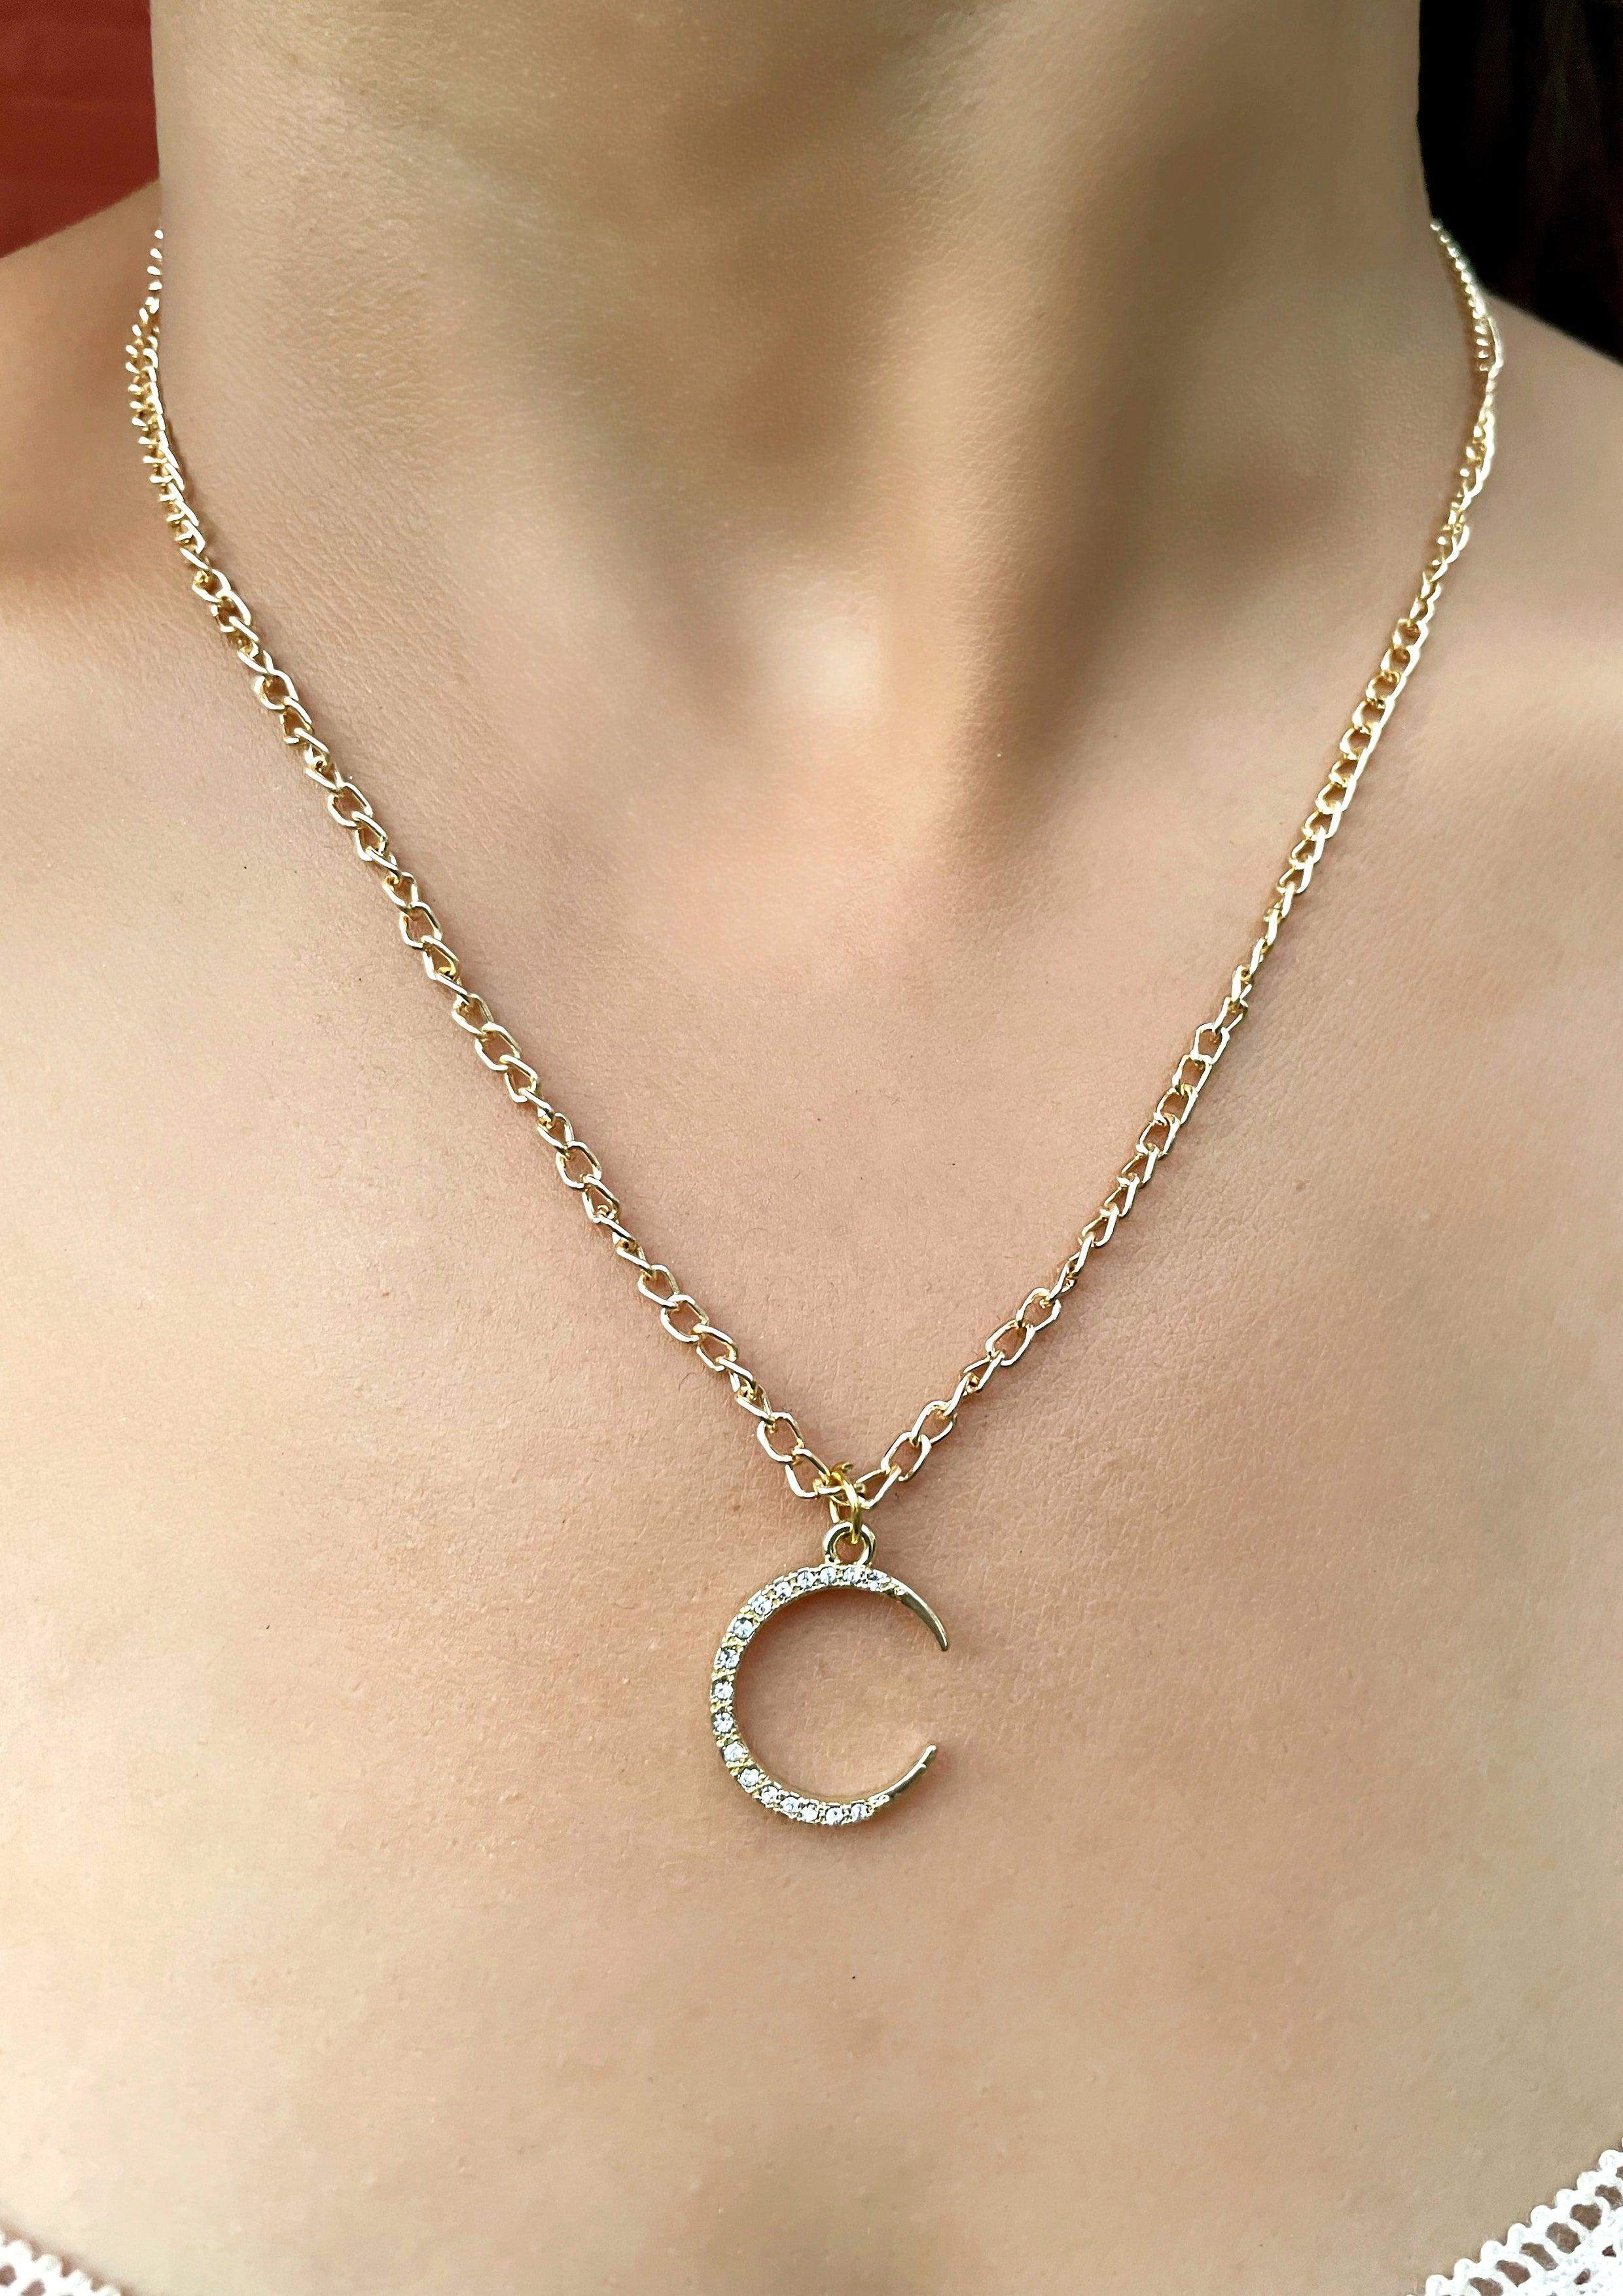 Crescent Moon Necklace Gold-Slayink-accessories,chain,chain necklace,Choker,crescent moon necklace,Gold chain,Gold necklace,jewellery,moon pendant,necklace,necklaces,pendant